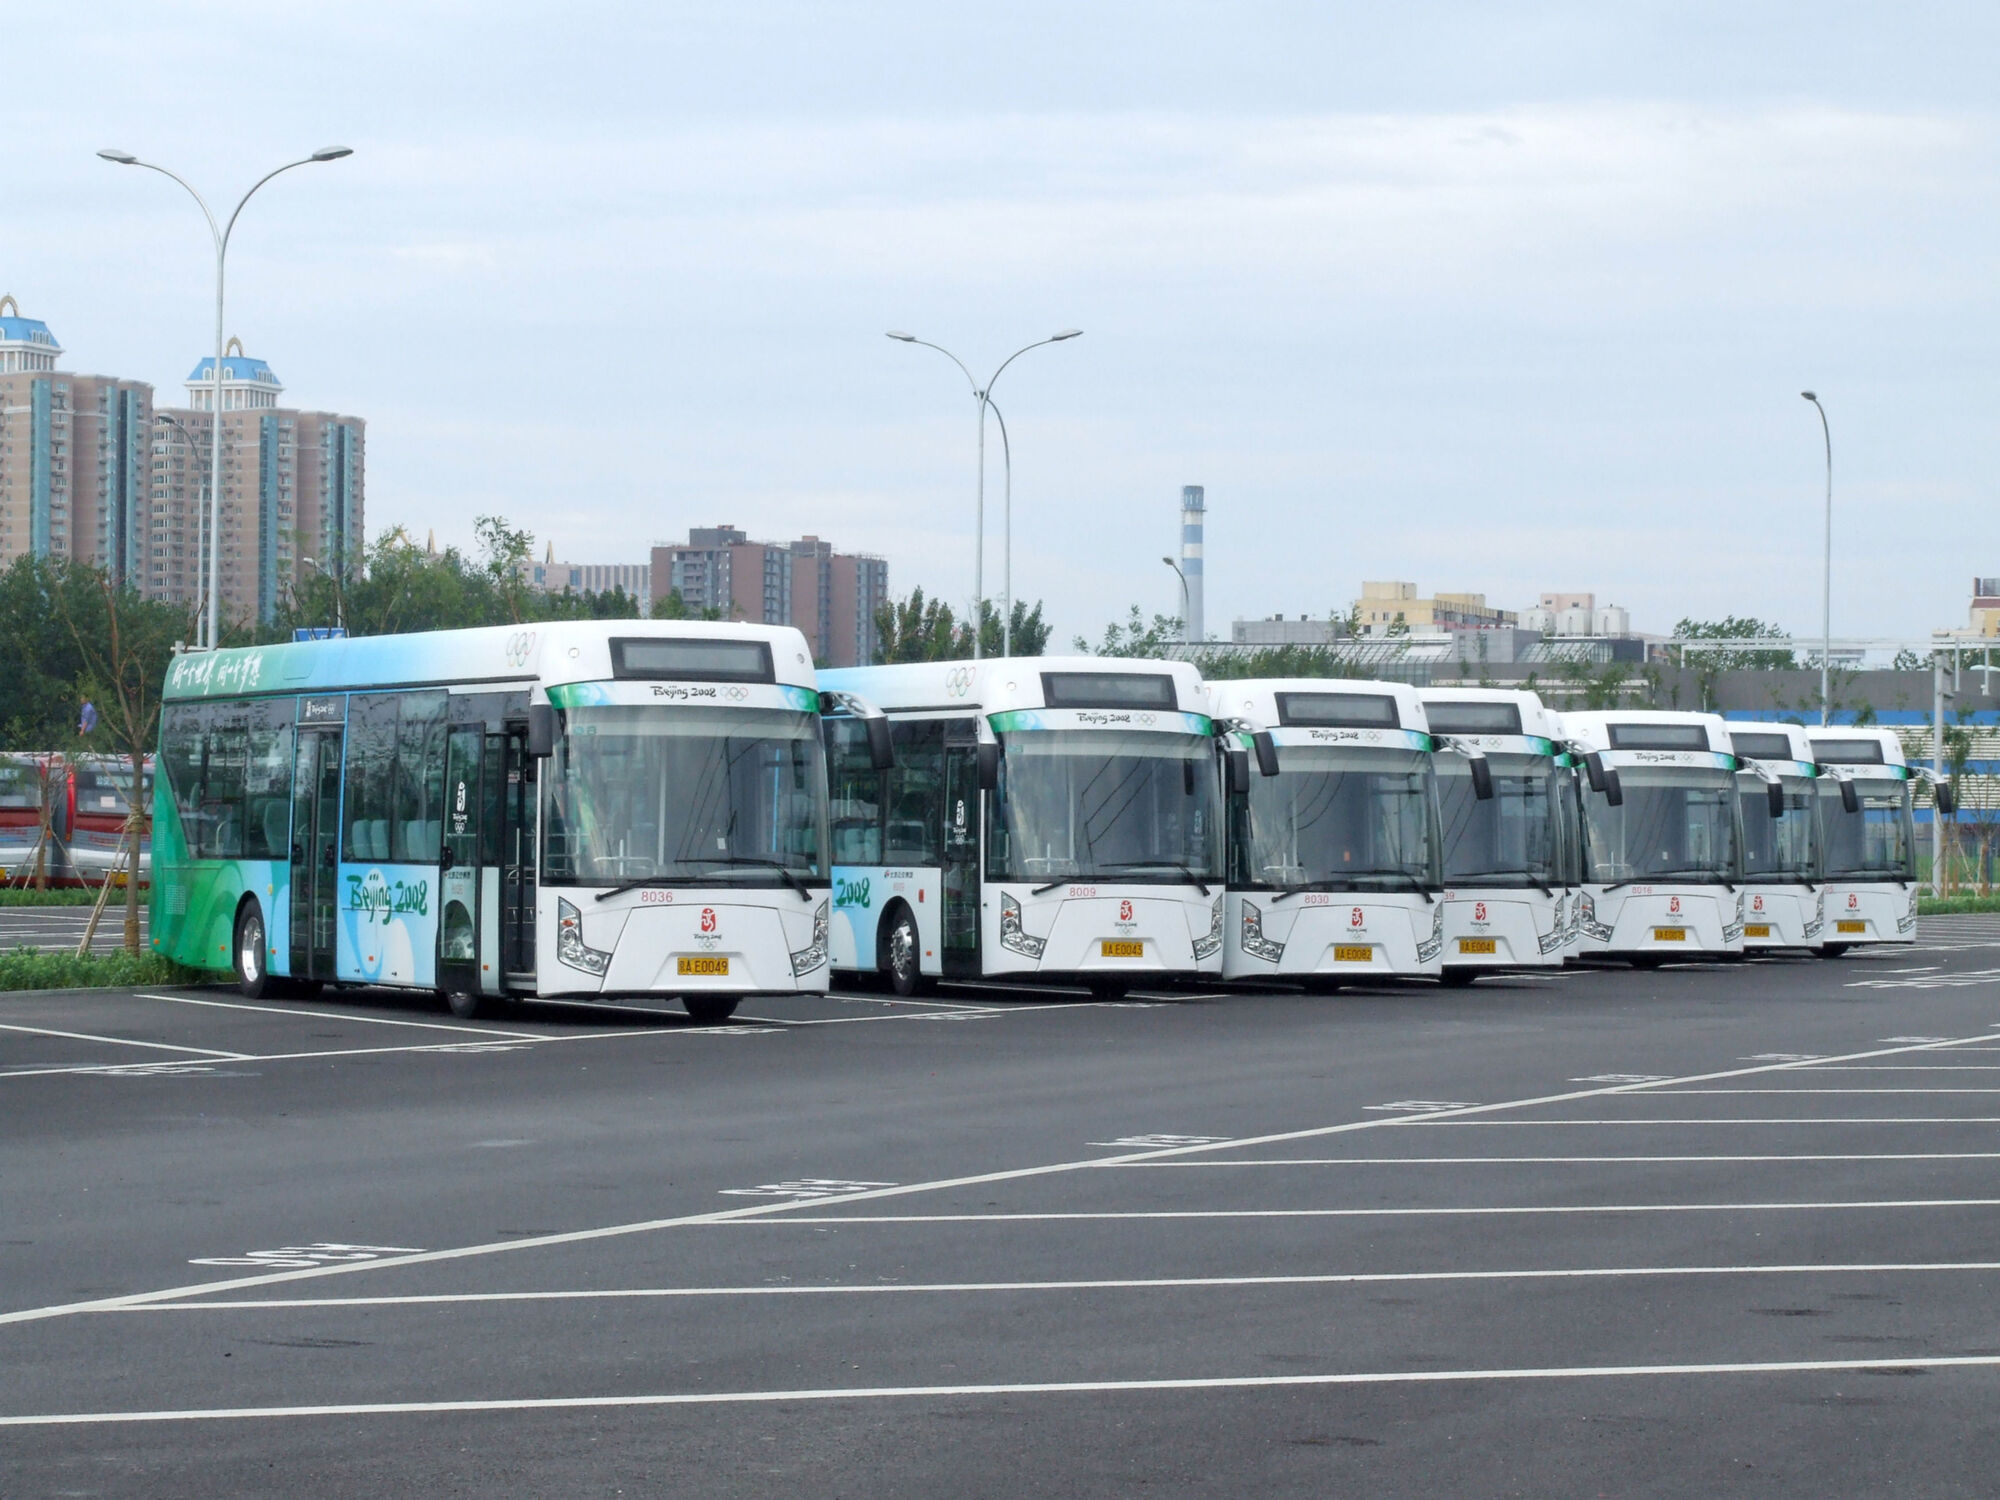 Fleet of parked buses